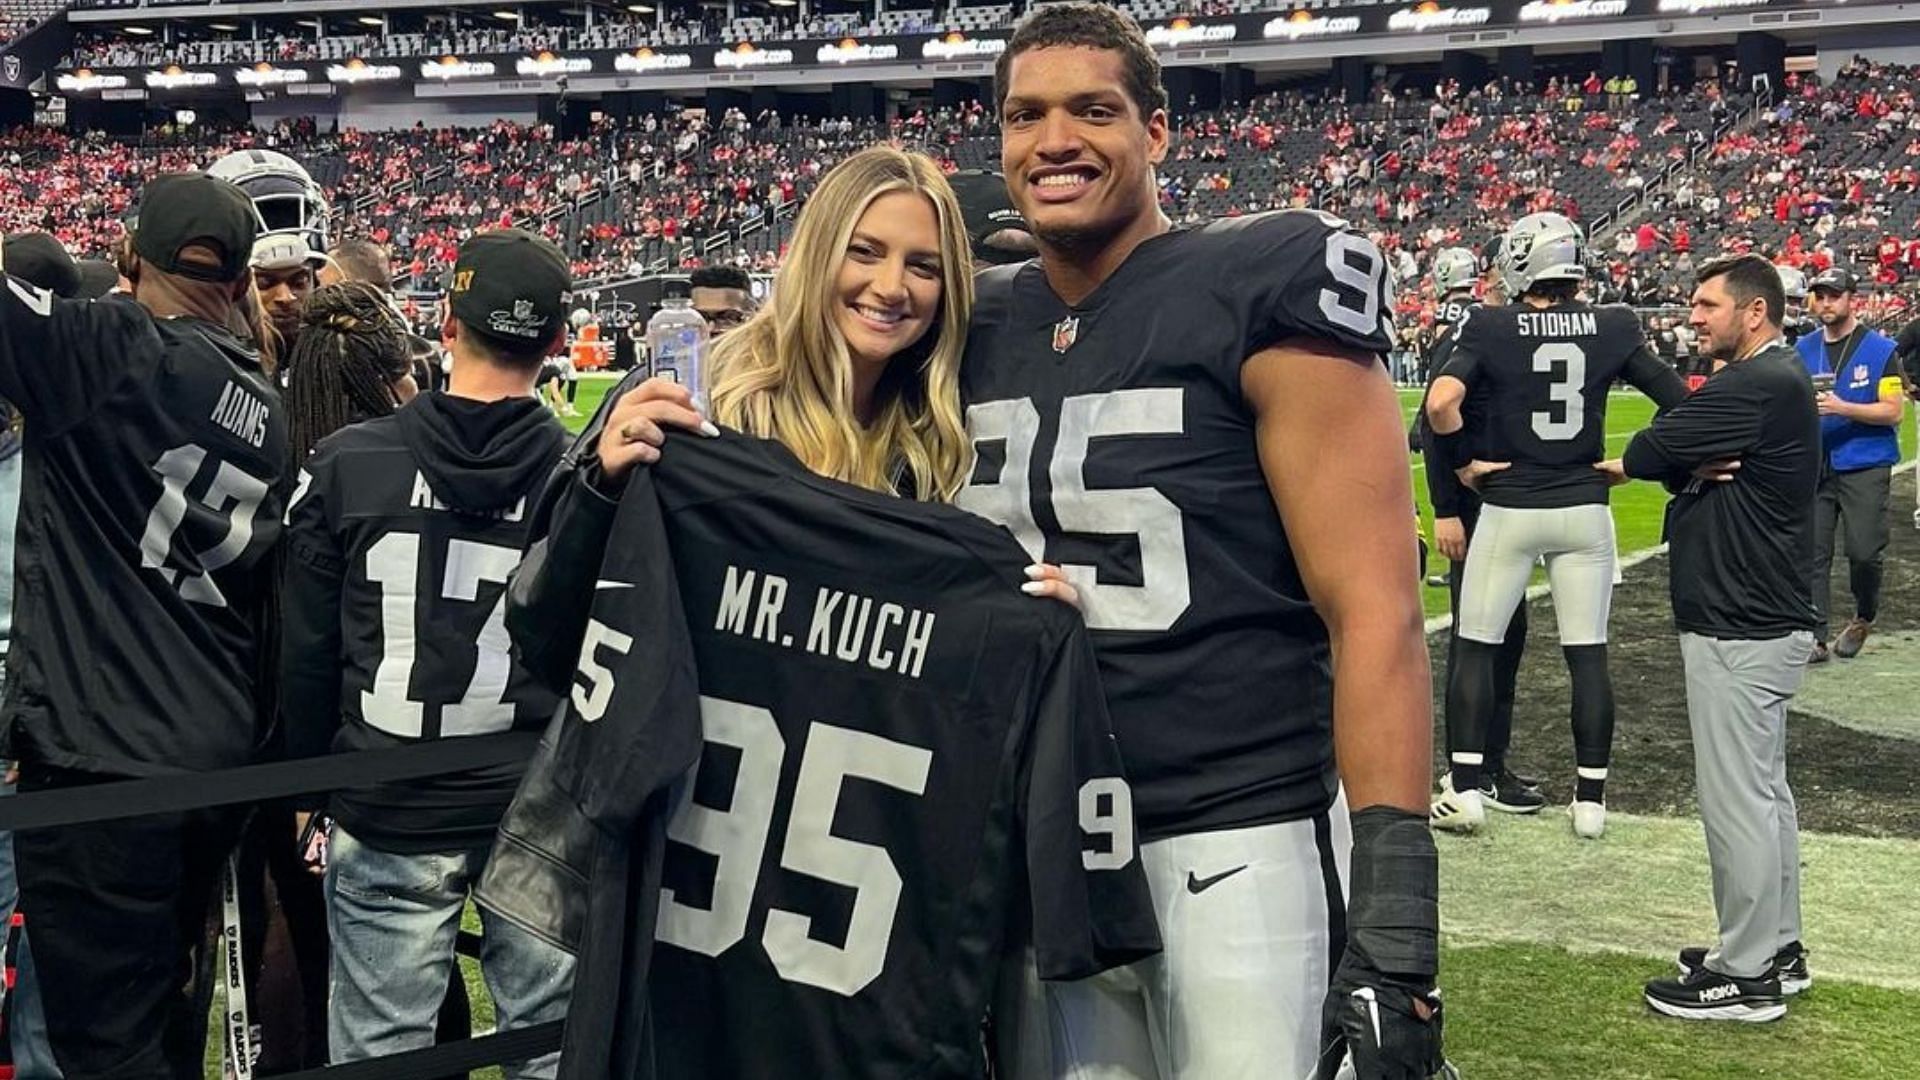 Allison Kuch celebrates as her husband gets re-signed by the Raiders. 